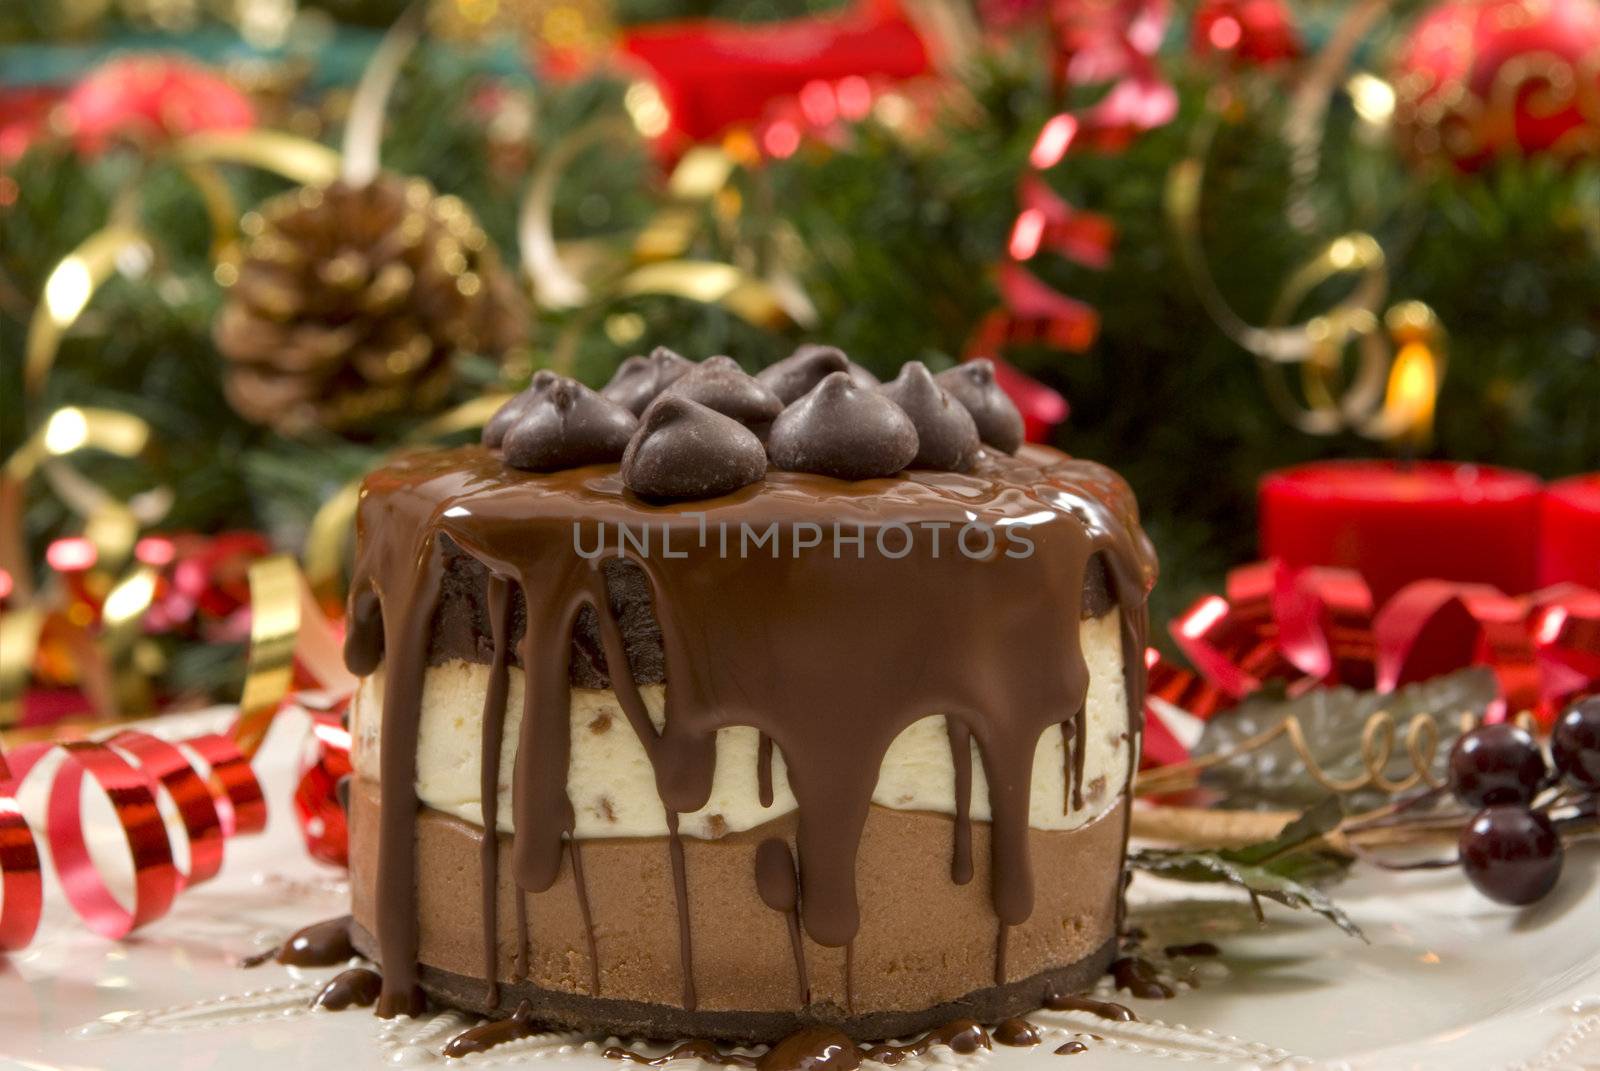 Beautifully decorated Christmas setting with gourmet desert